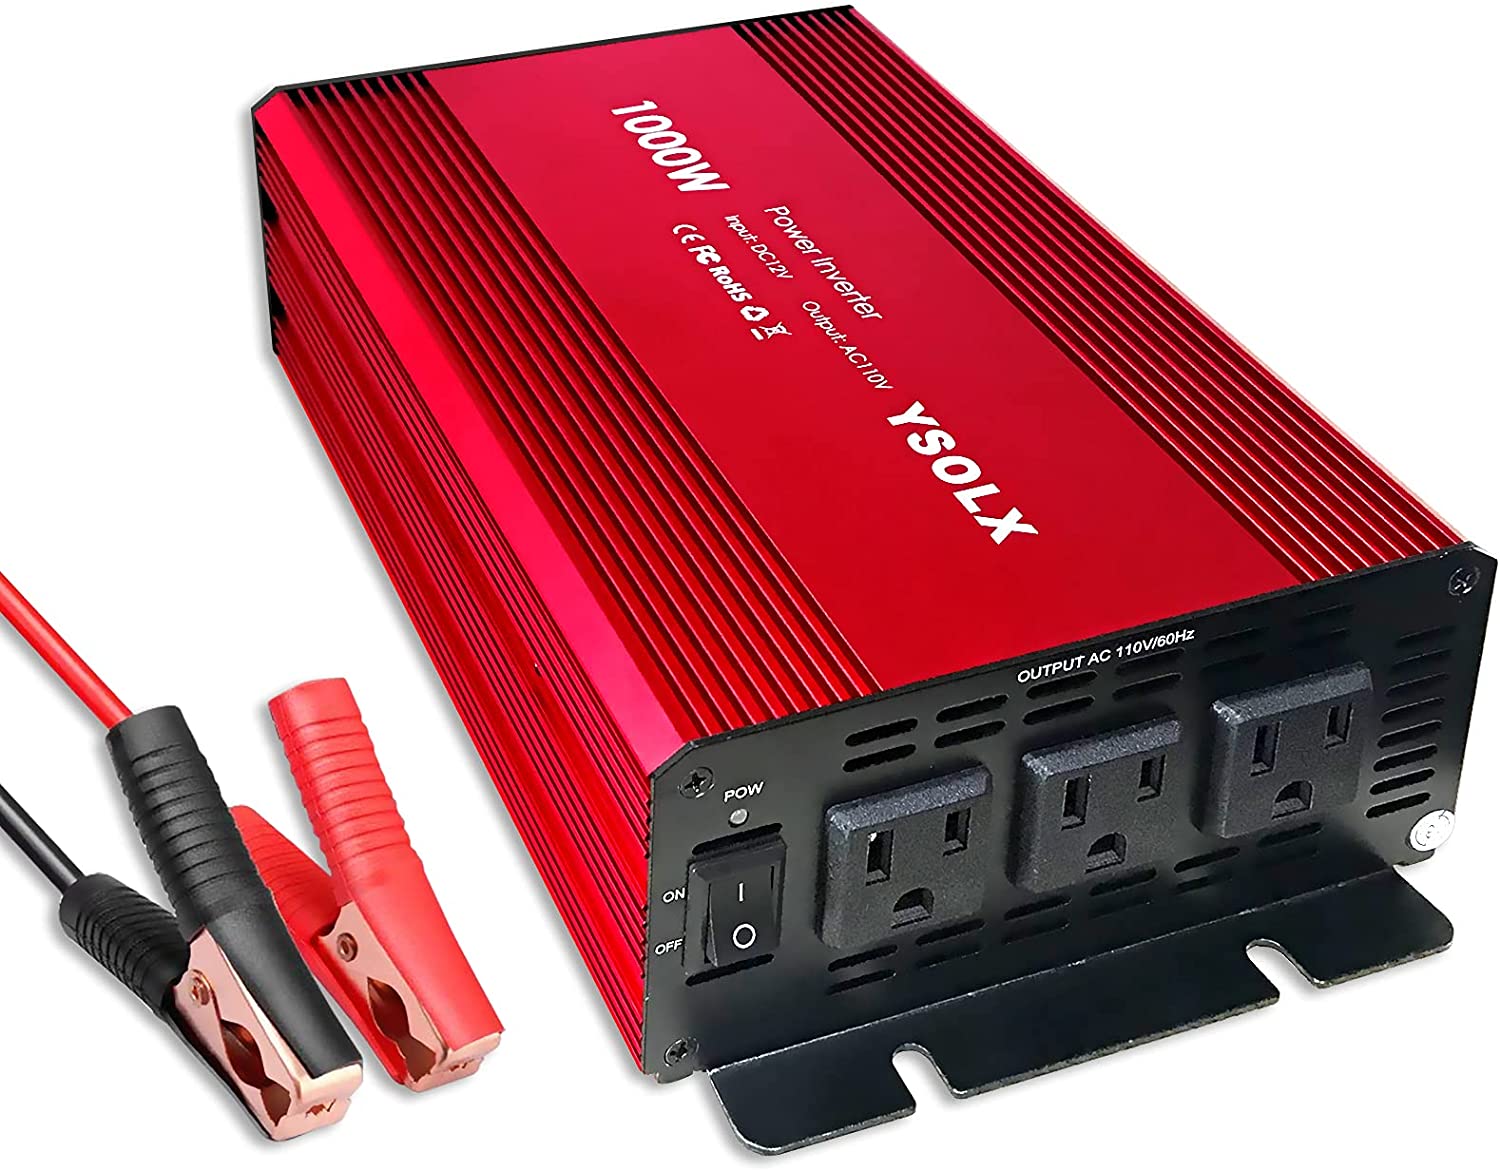 YSOLX Power Inverter 12v to 110v, Dc to Ac Converter with 3 AC Outlets, 1000W Modified Sine Wave Inverter for Car/RV/Home